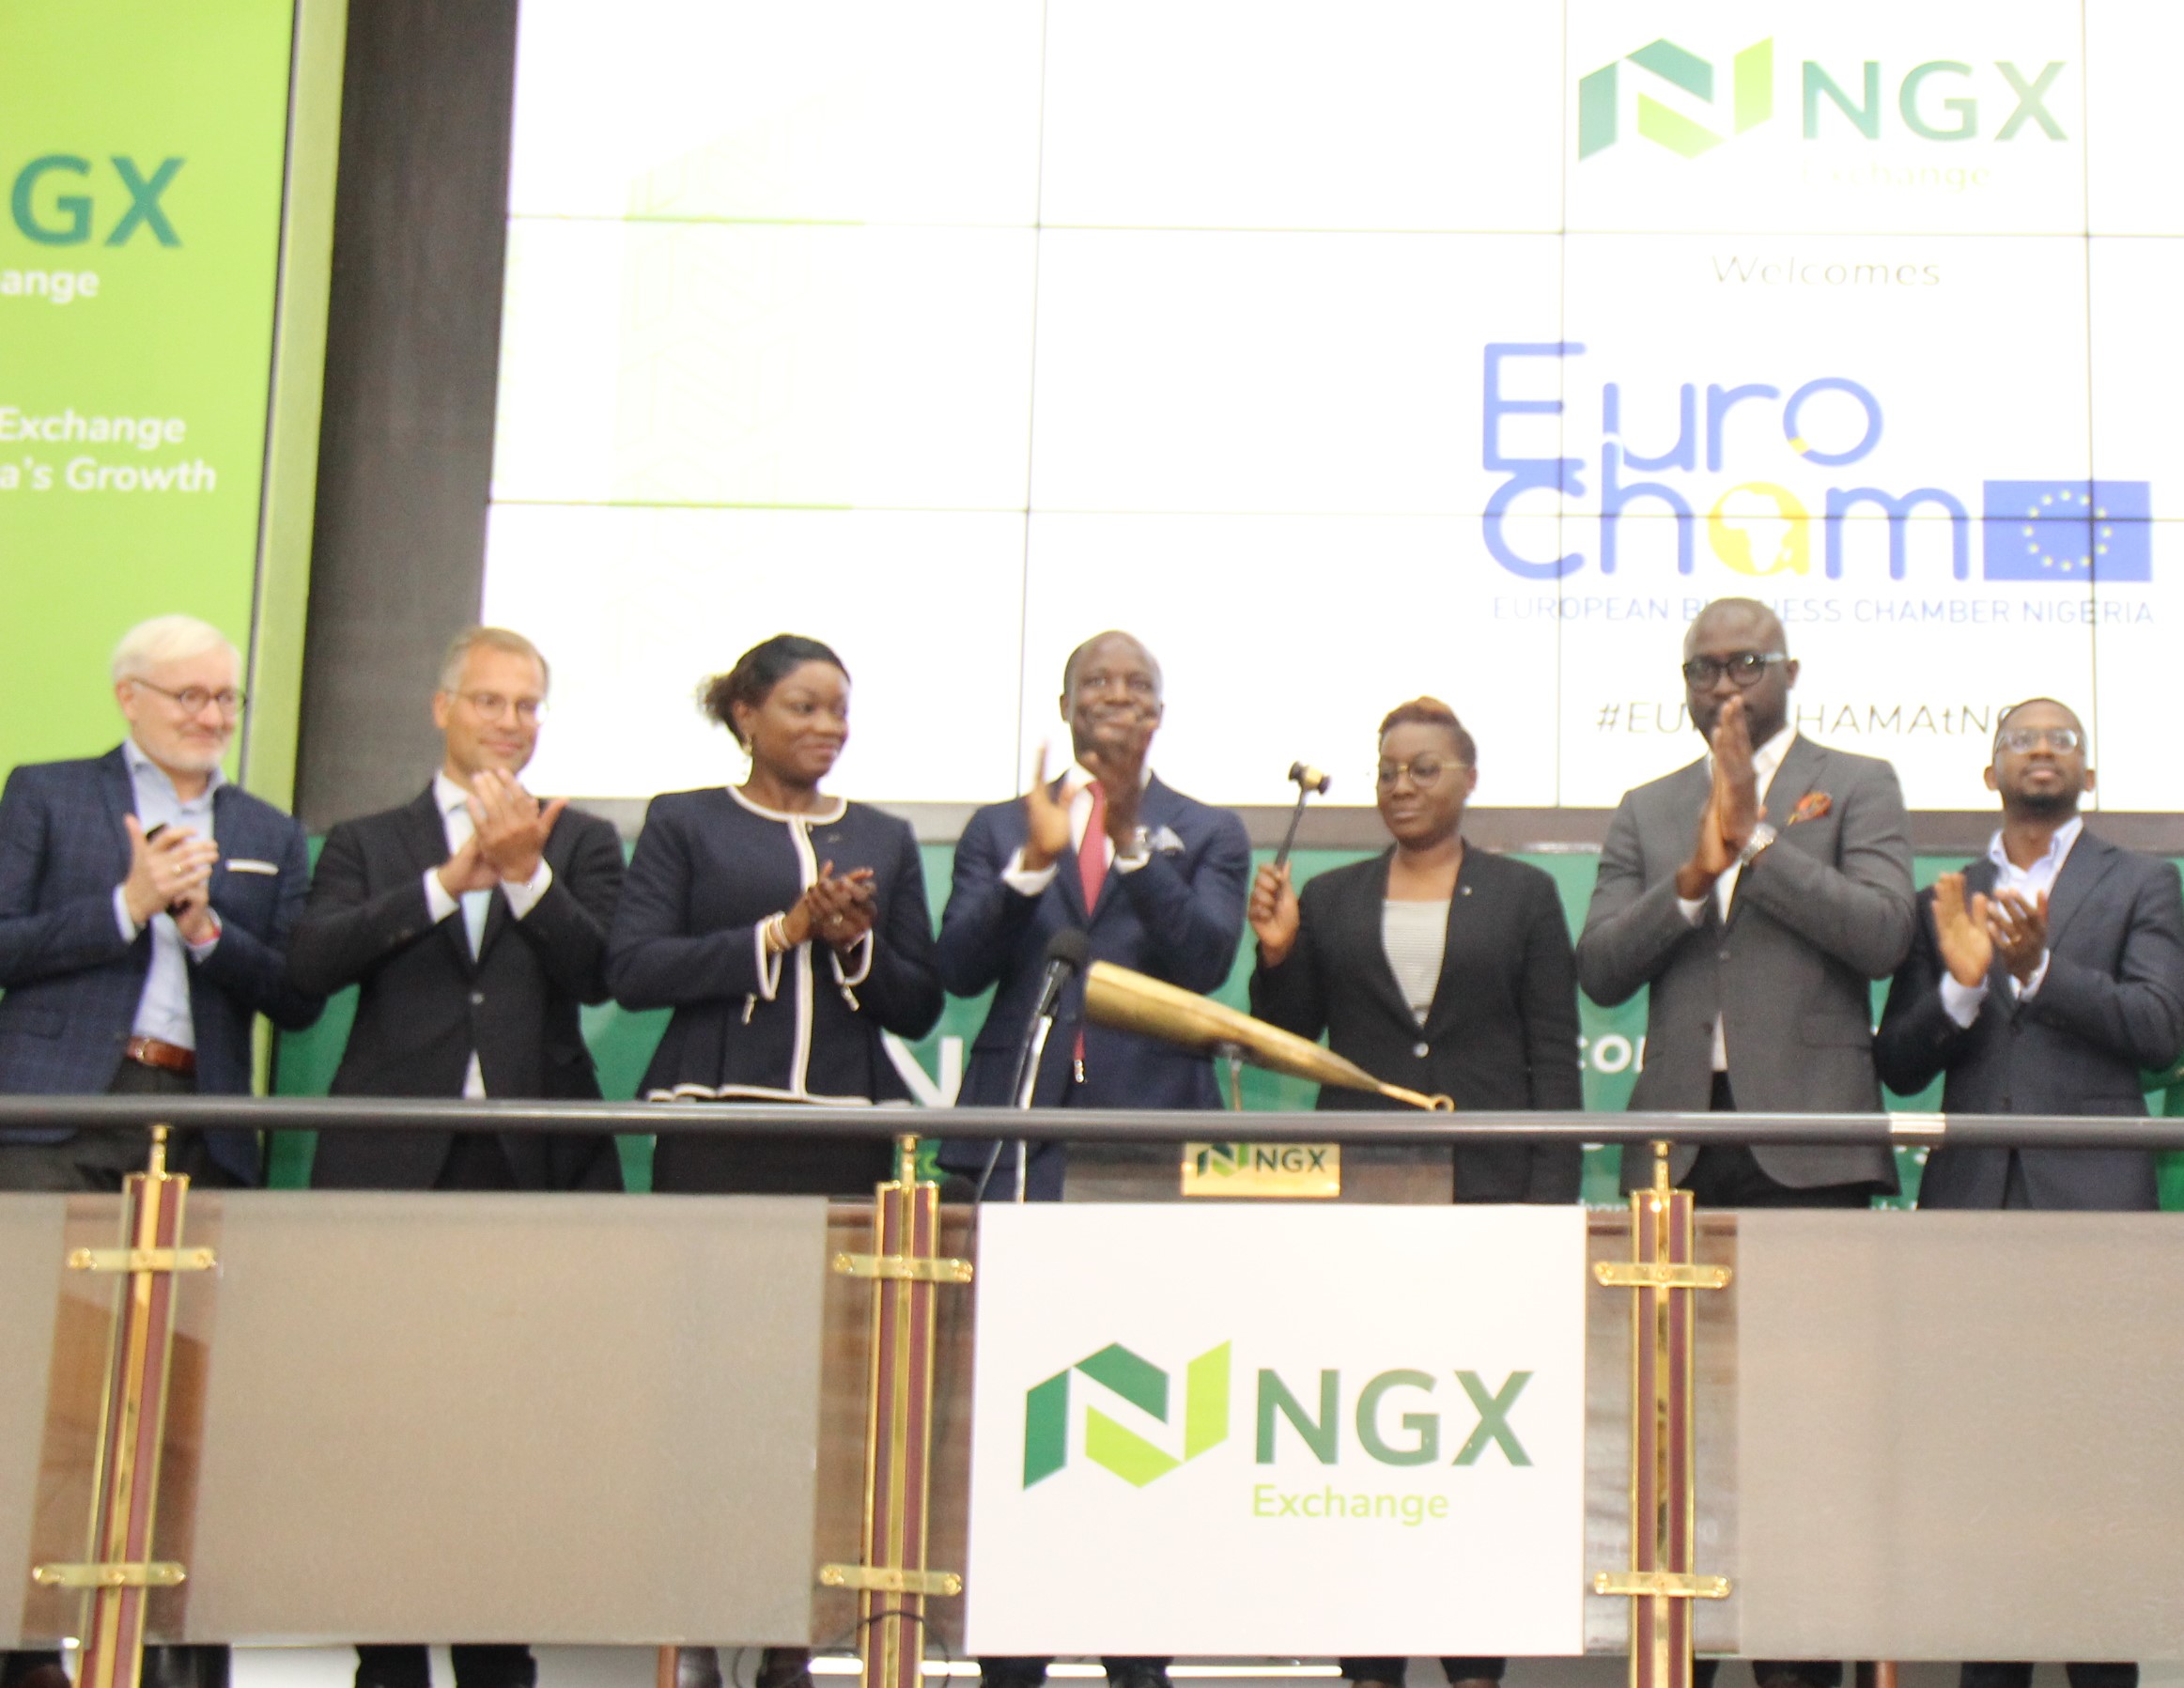 Photo: Closing Gong Ceremony In Honour Of European Business Chamber At The Exchange